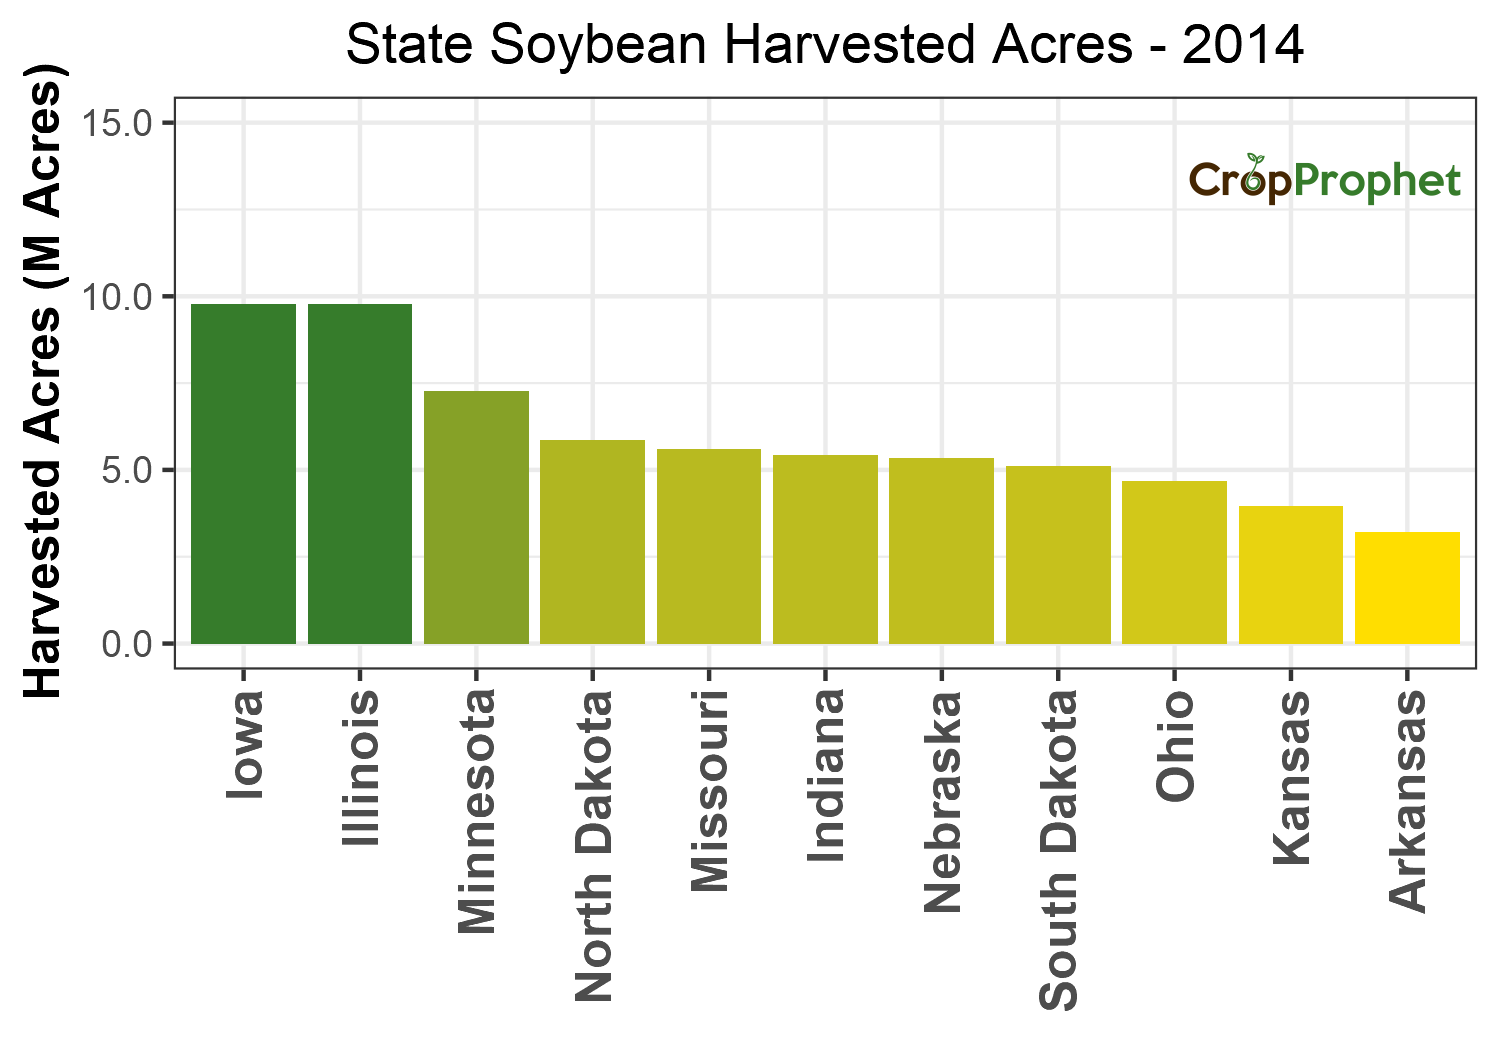 Soybean Harvested Acres by State - 2014 Rankings